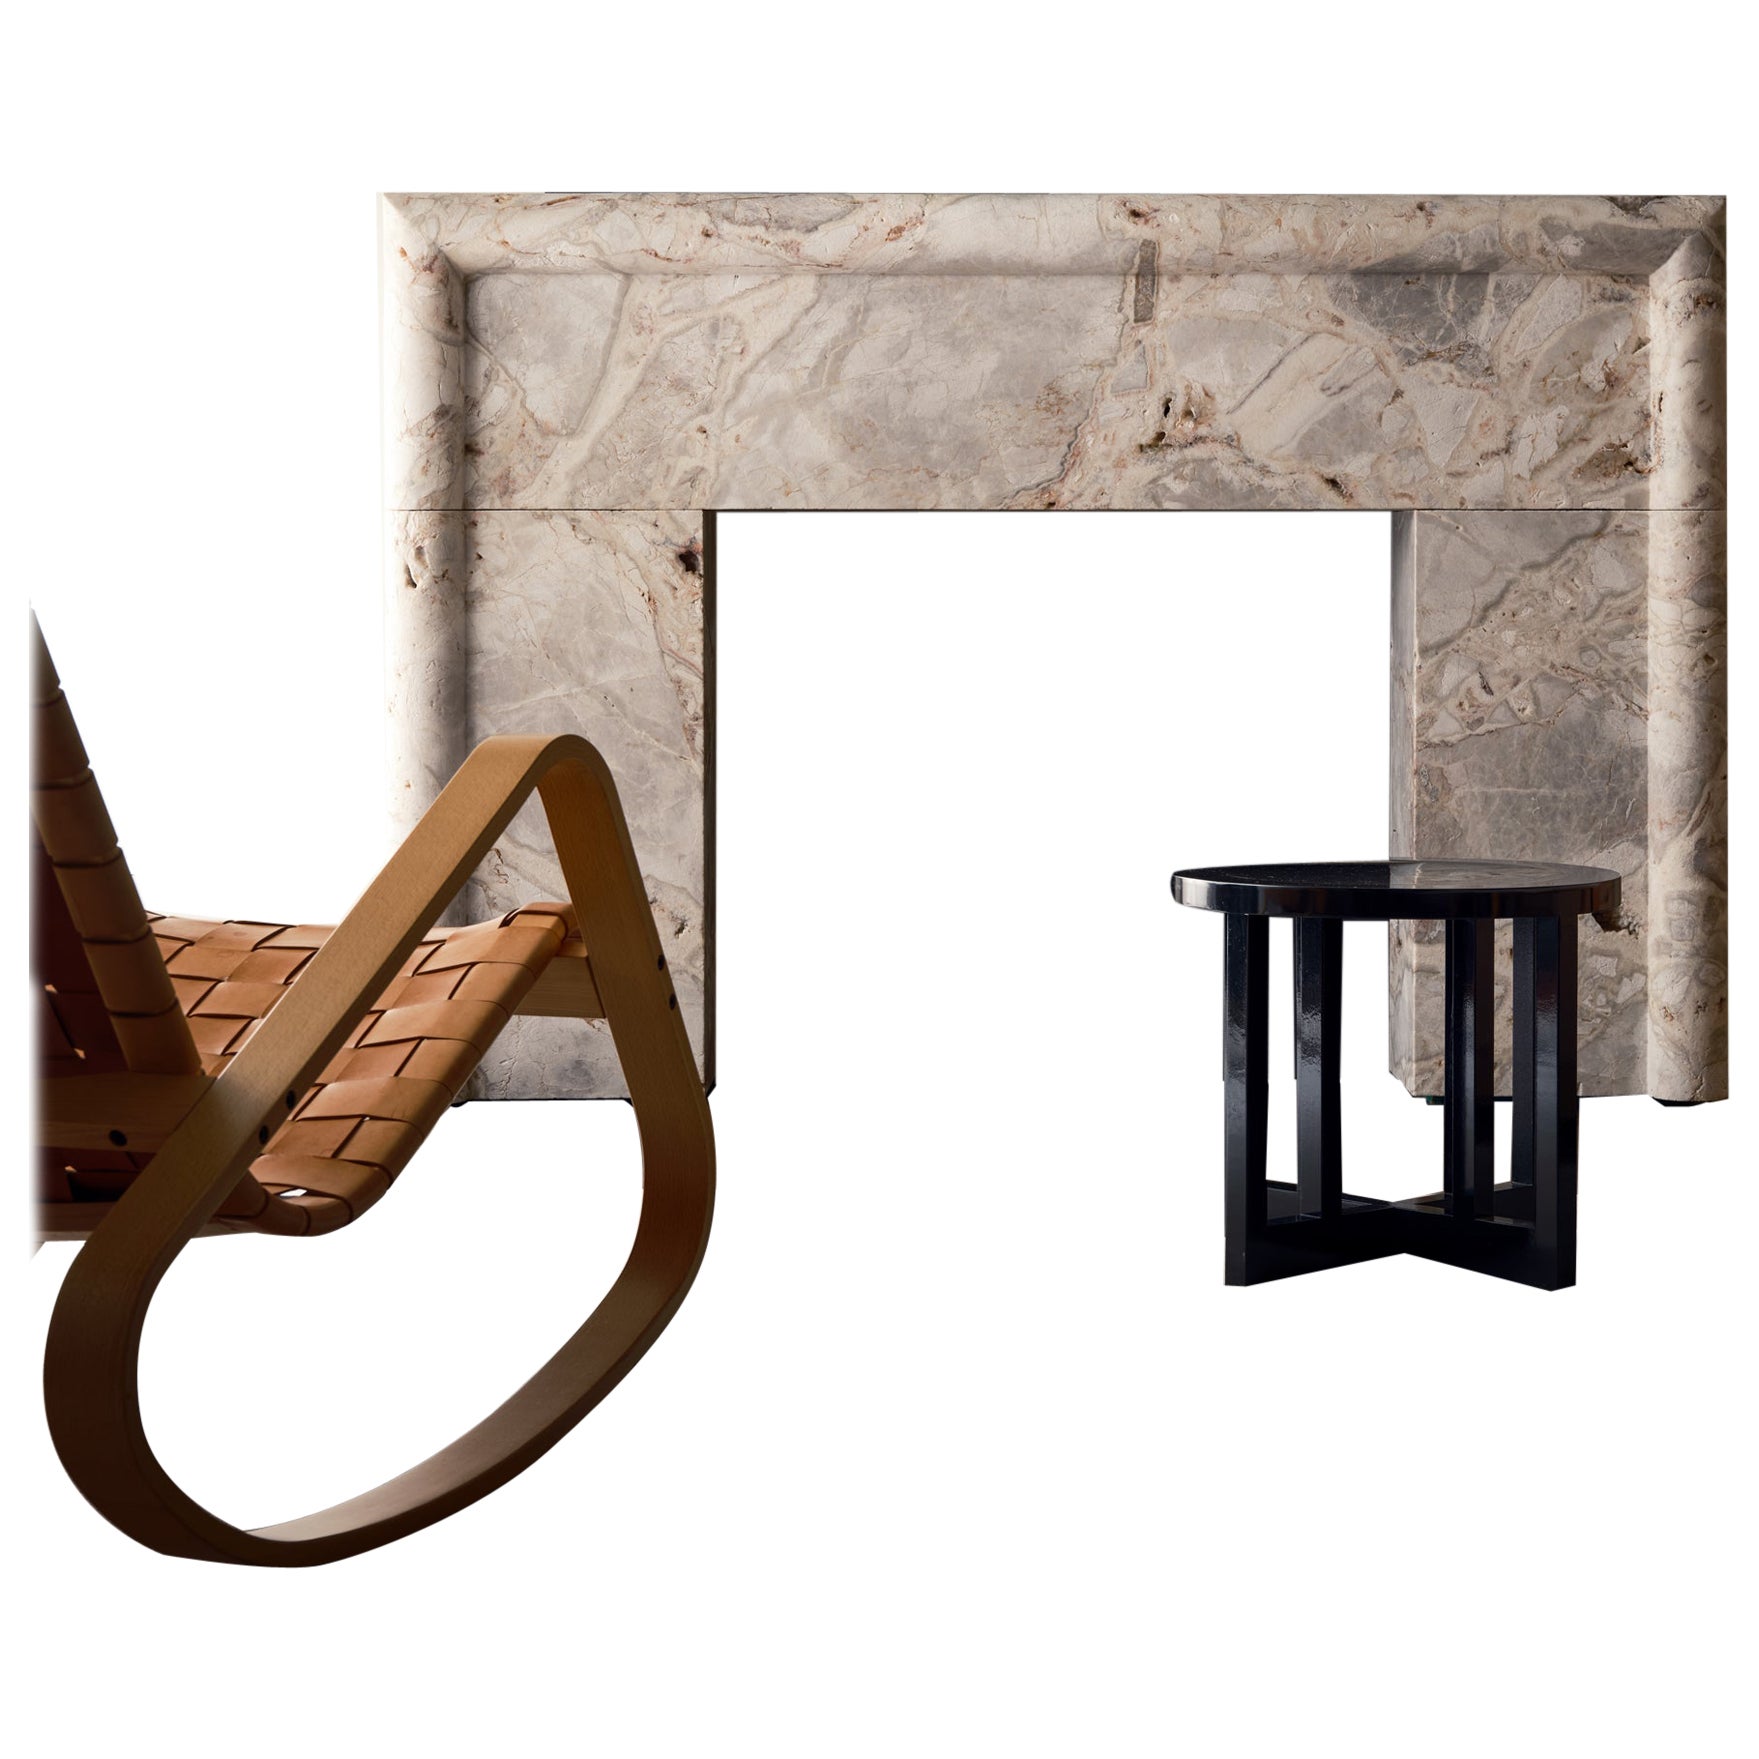 STRIKE Marble Sea Ranch Fireplace For Sale